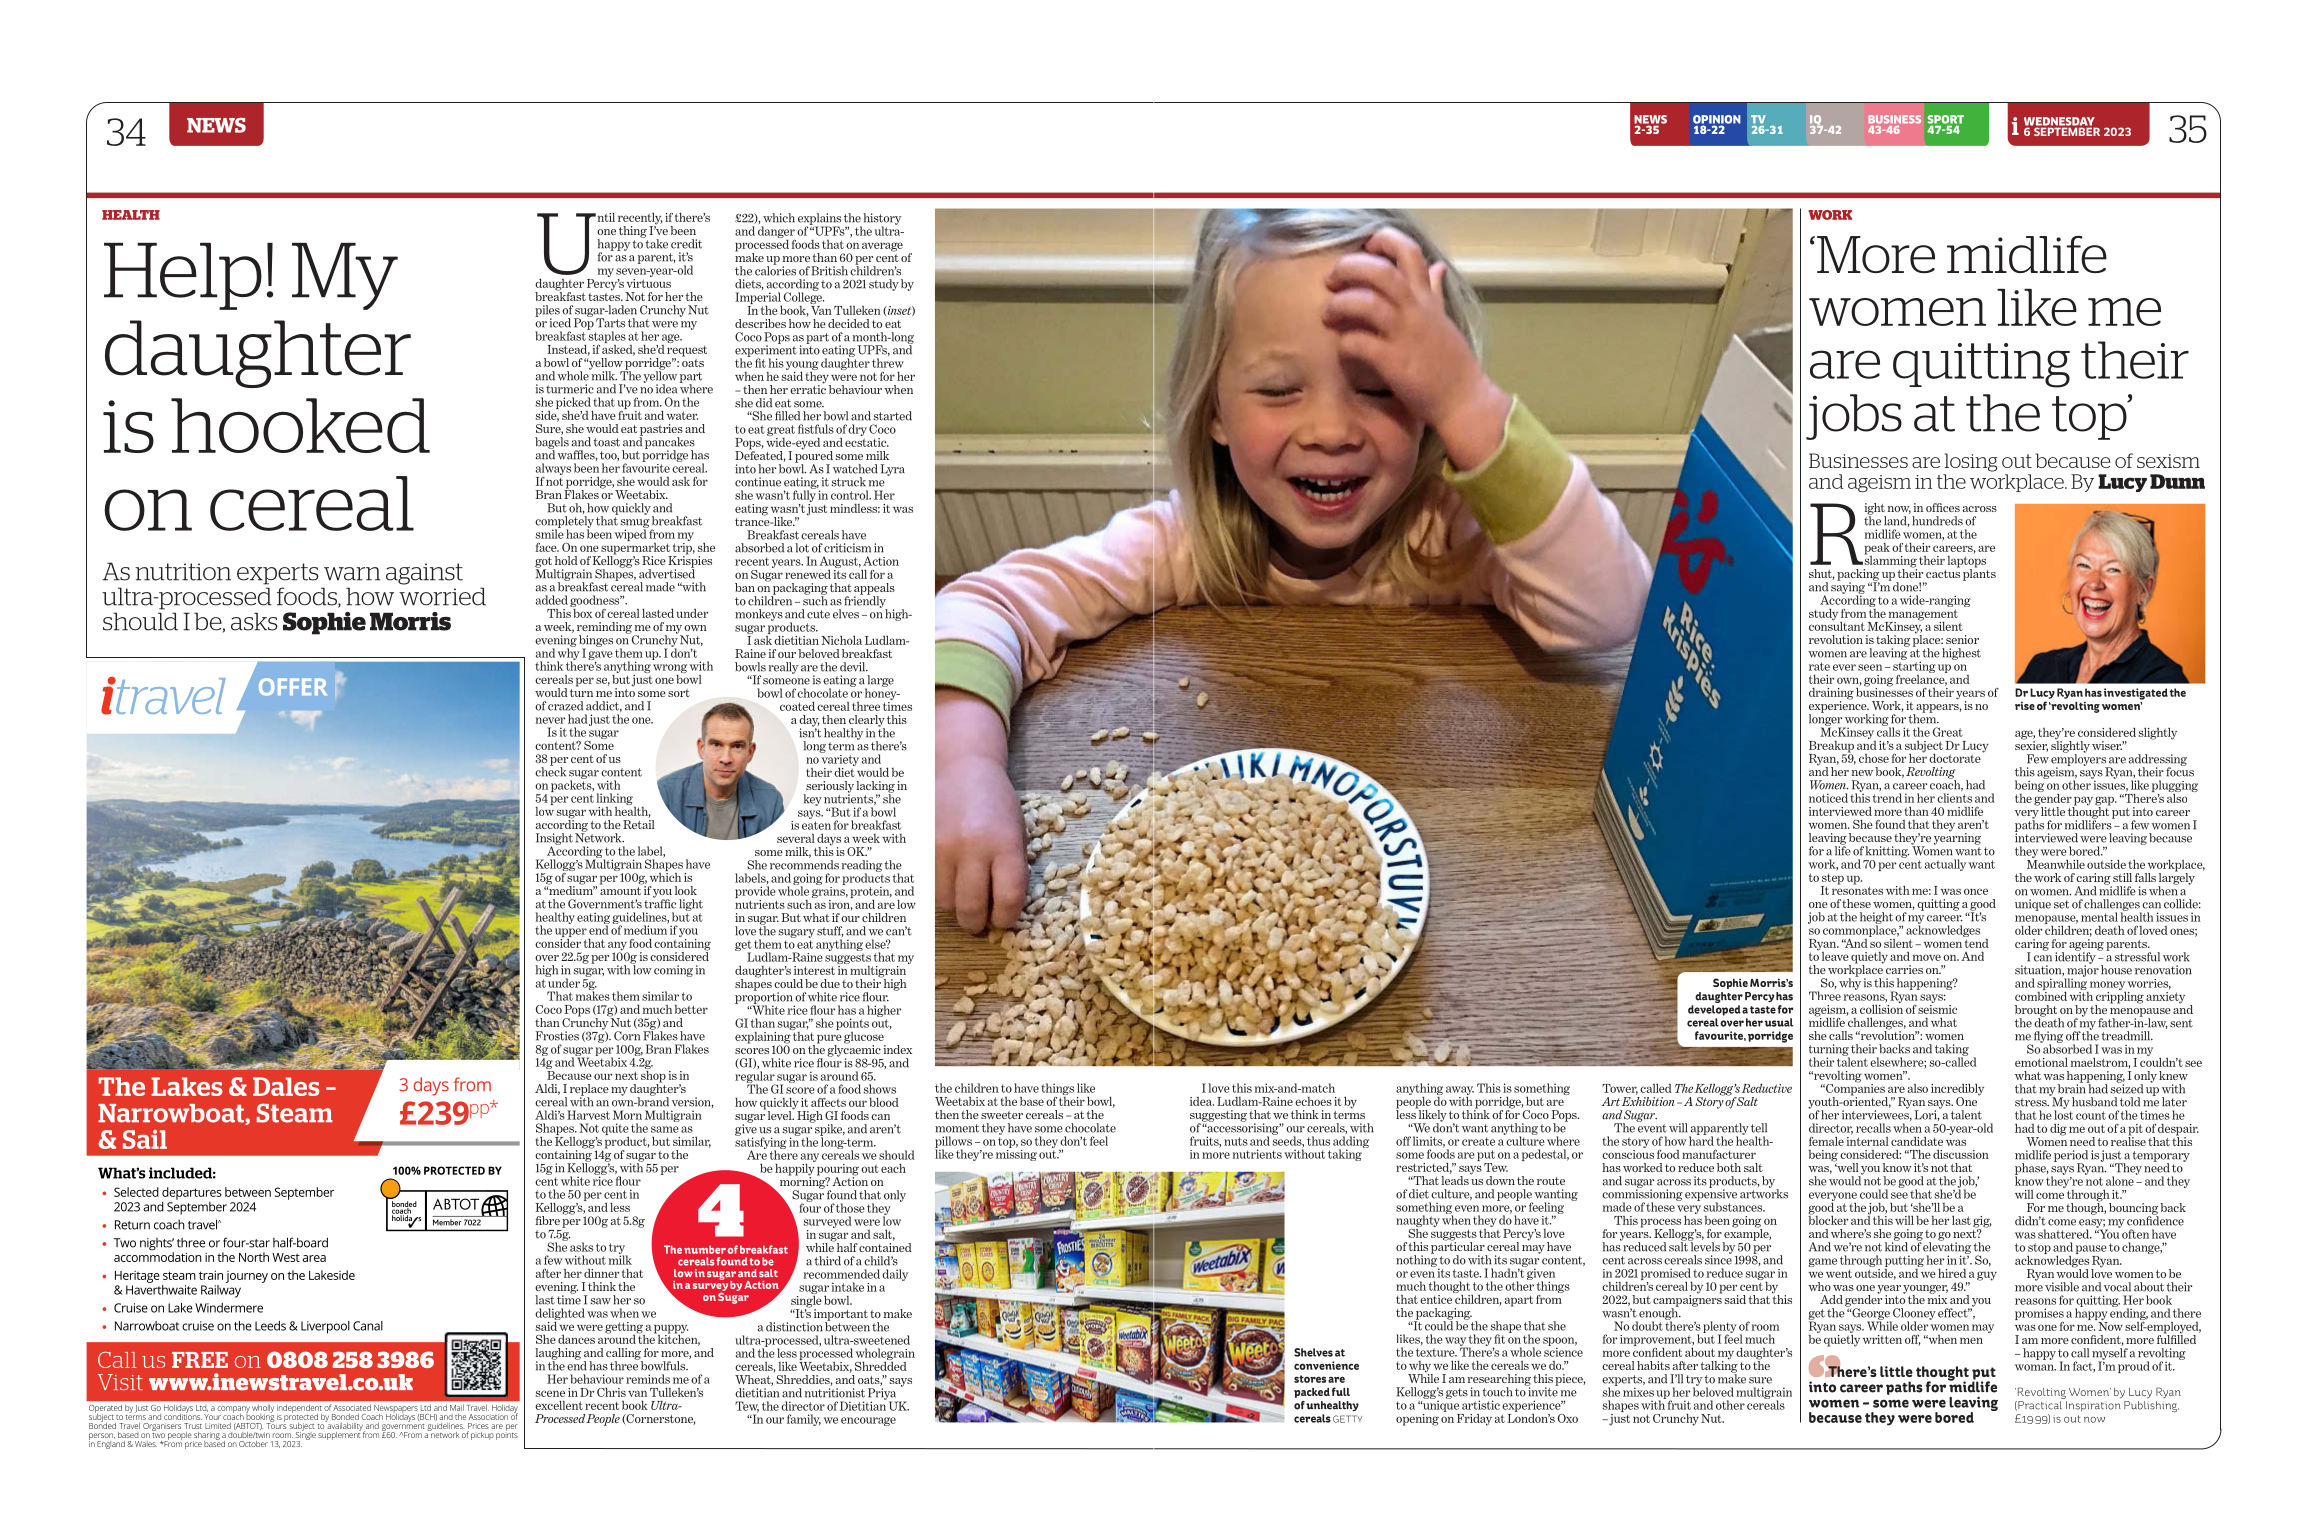 Article on cereal in the I paper